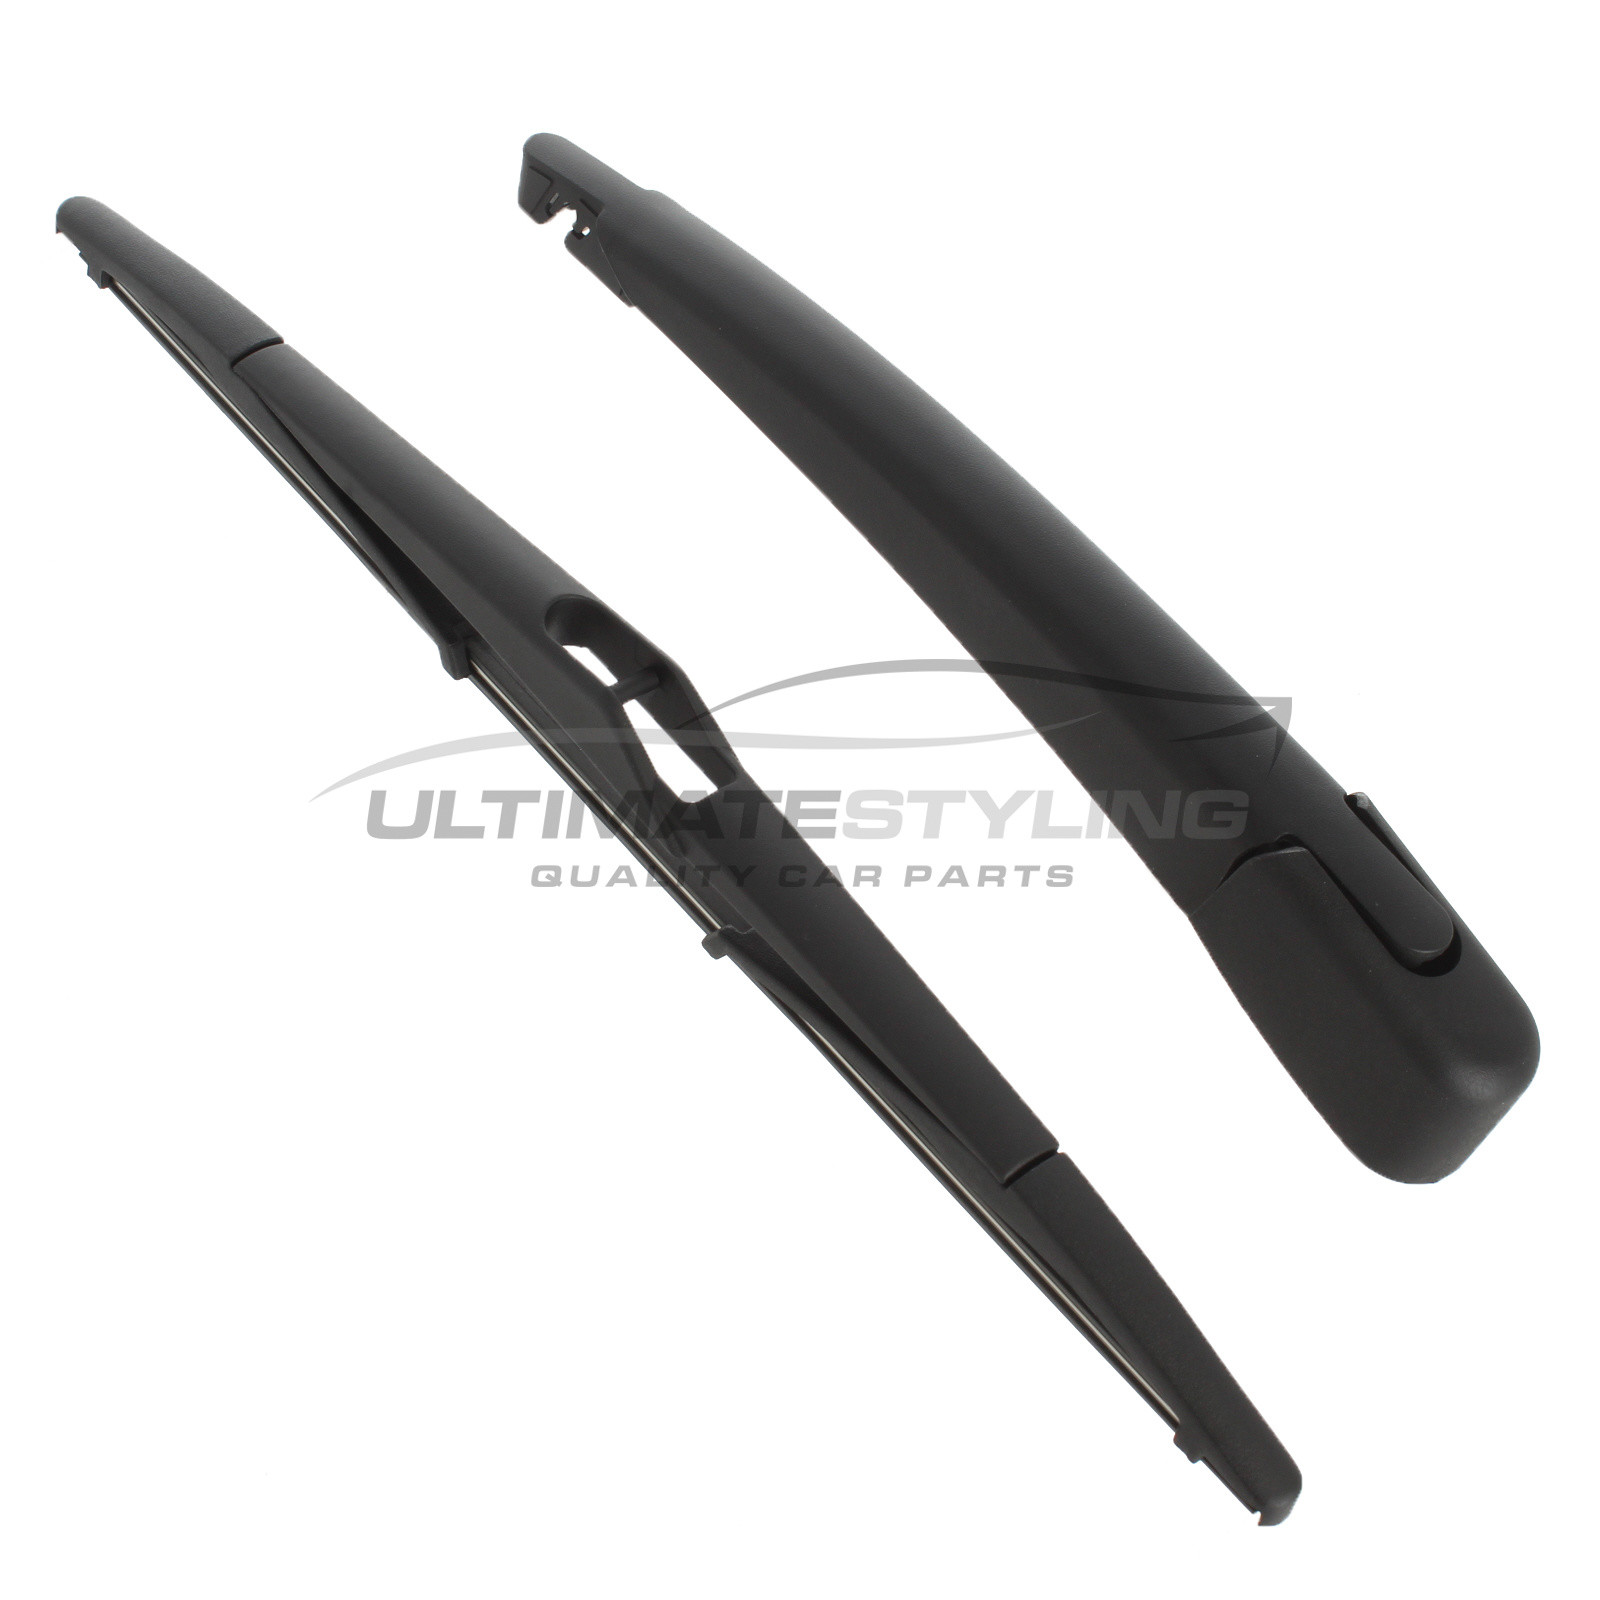 Rear Wiper Arm & Blade Set for Ford Kuga